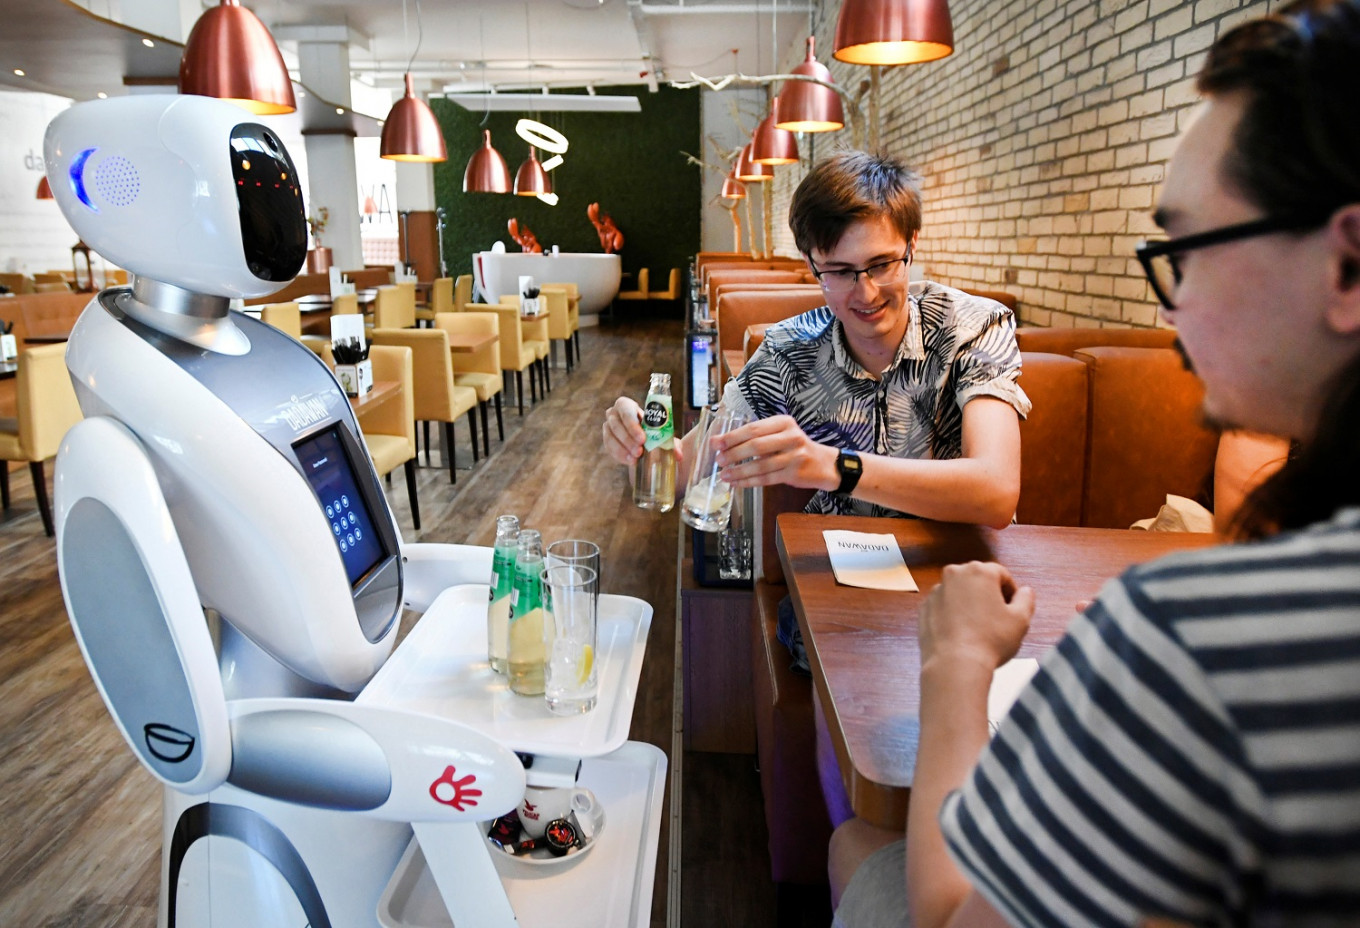 Robot servers as a popular restaurant Design Trend in a Post COVID-19 World